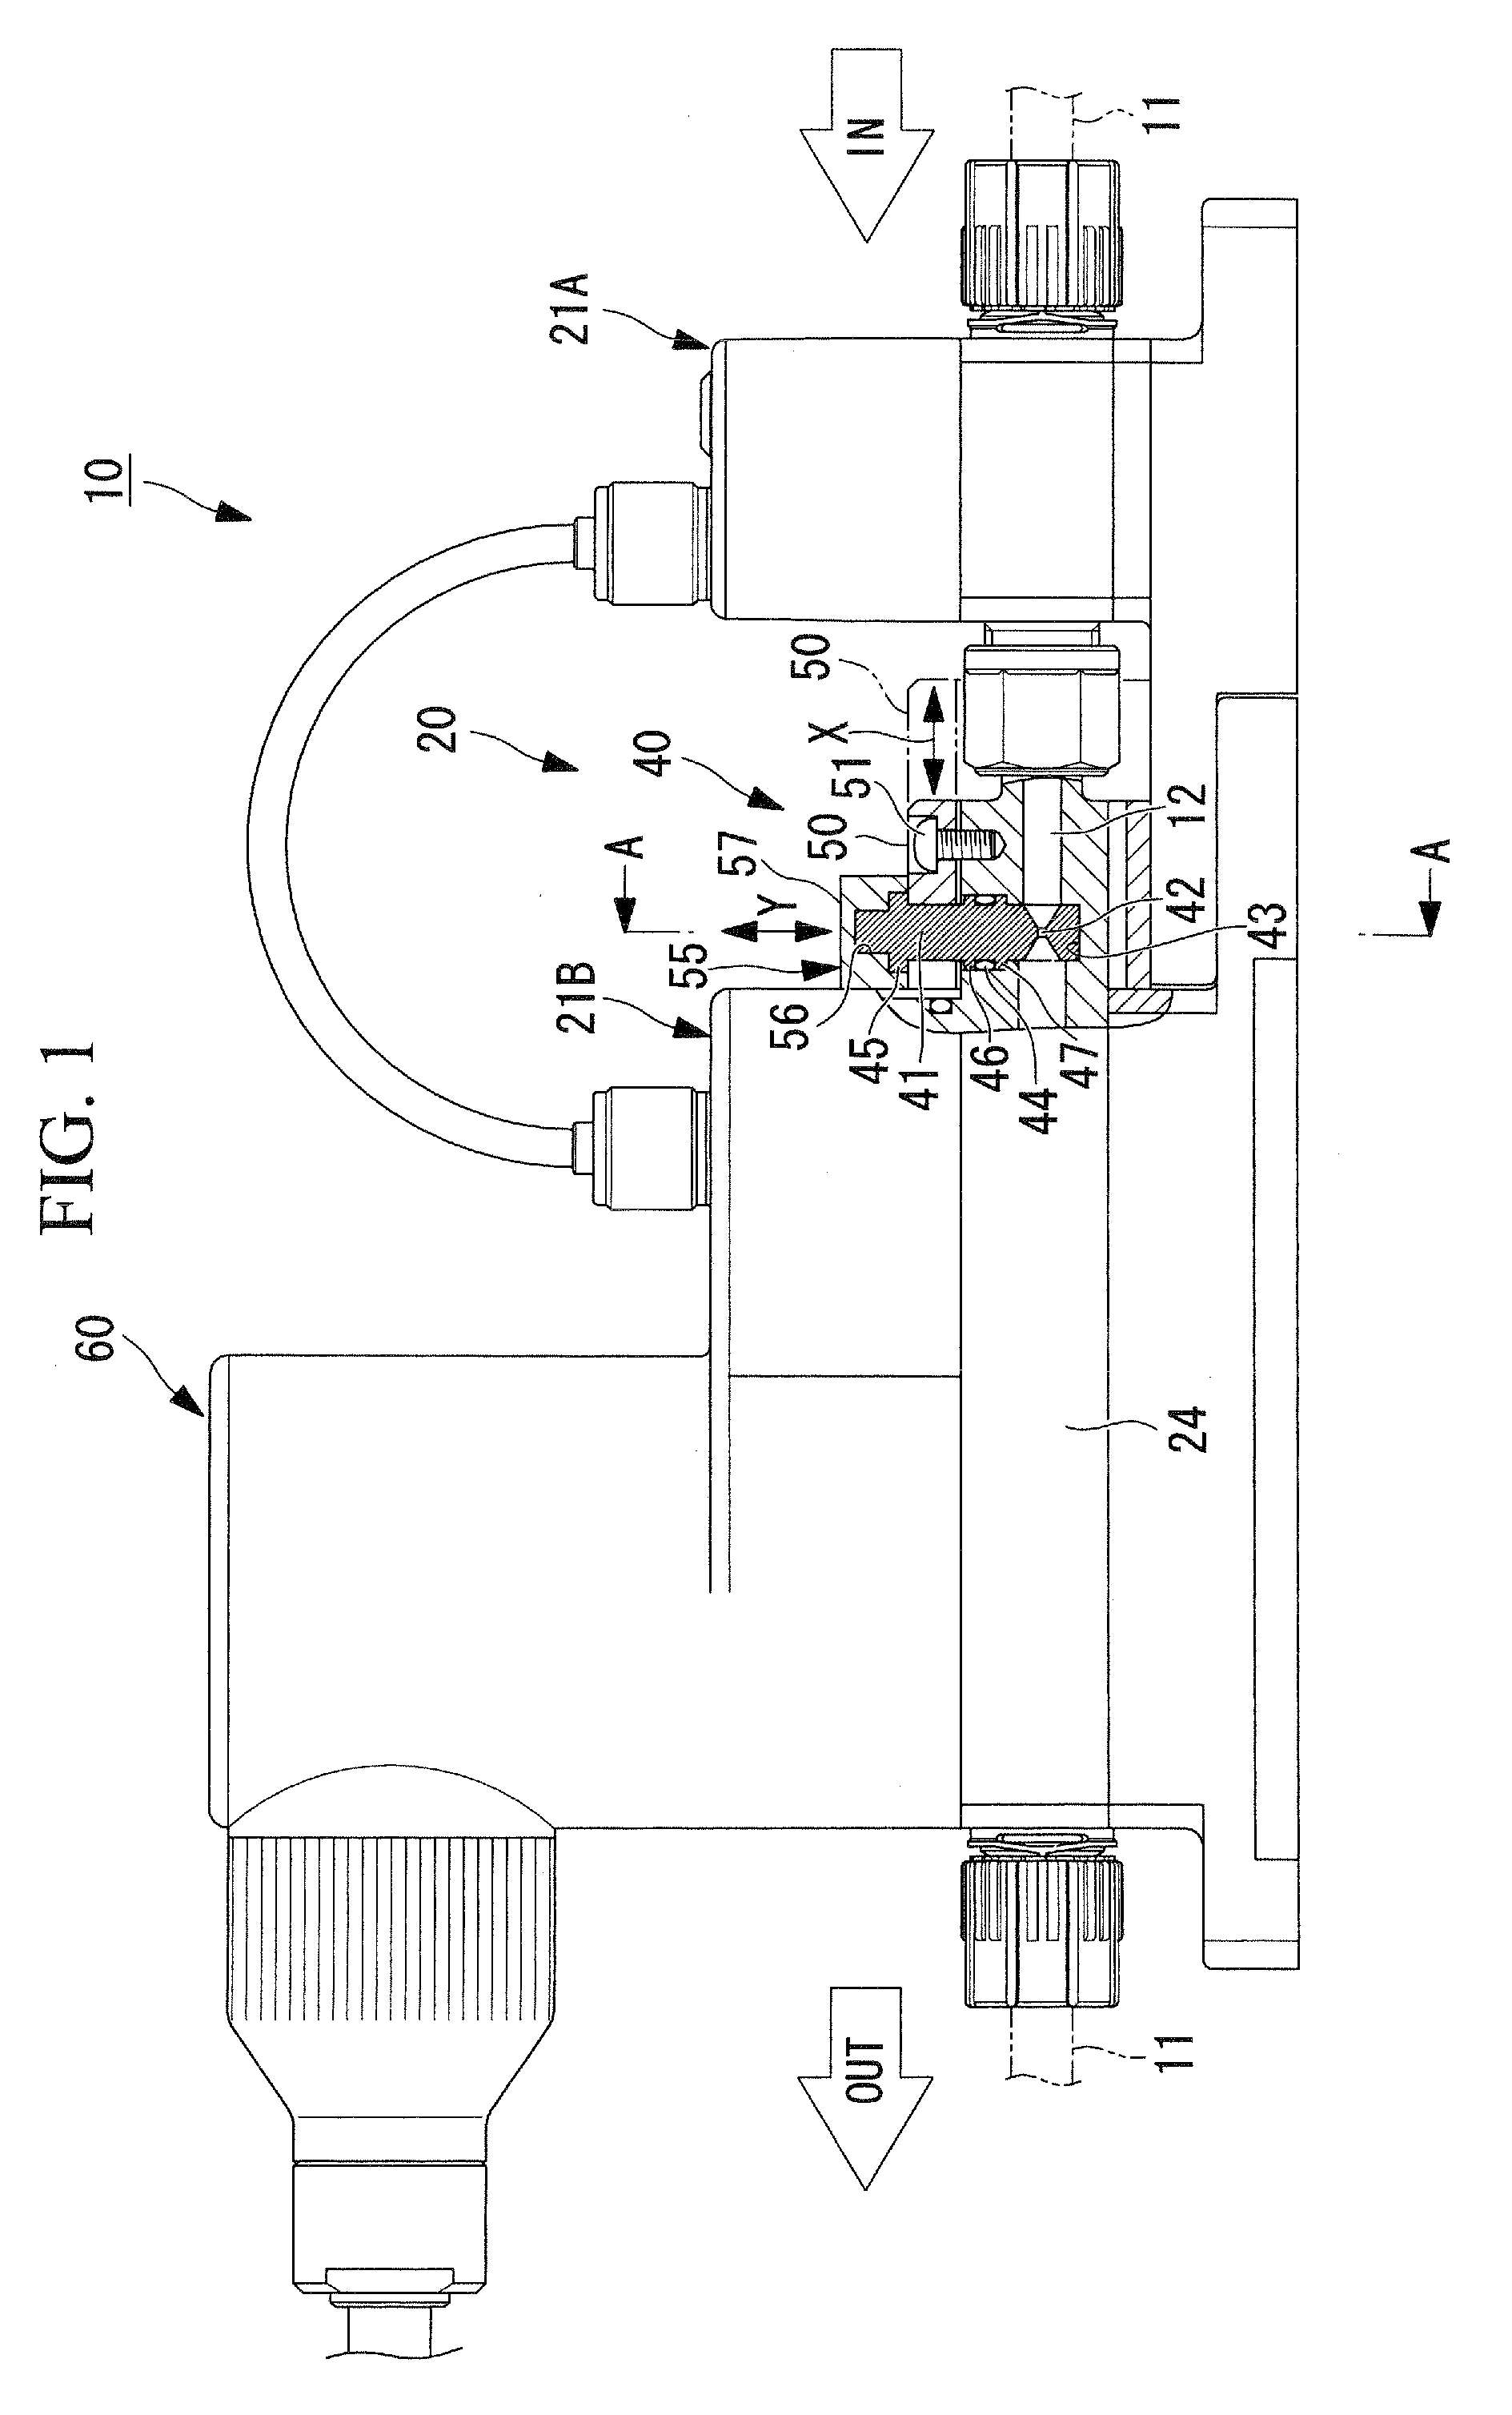 Differential-pressure flow meter and flow-rate controller